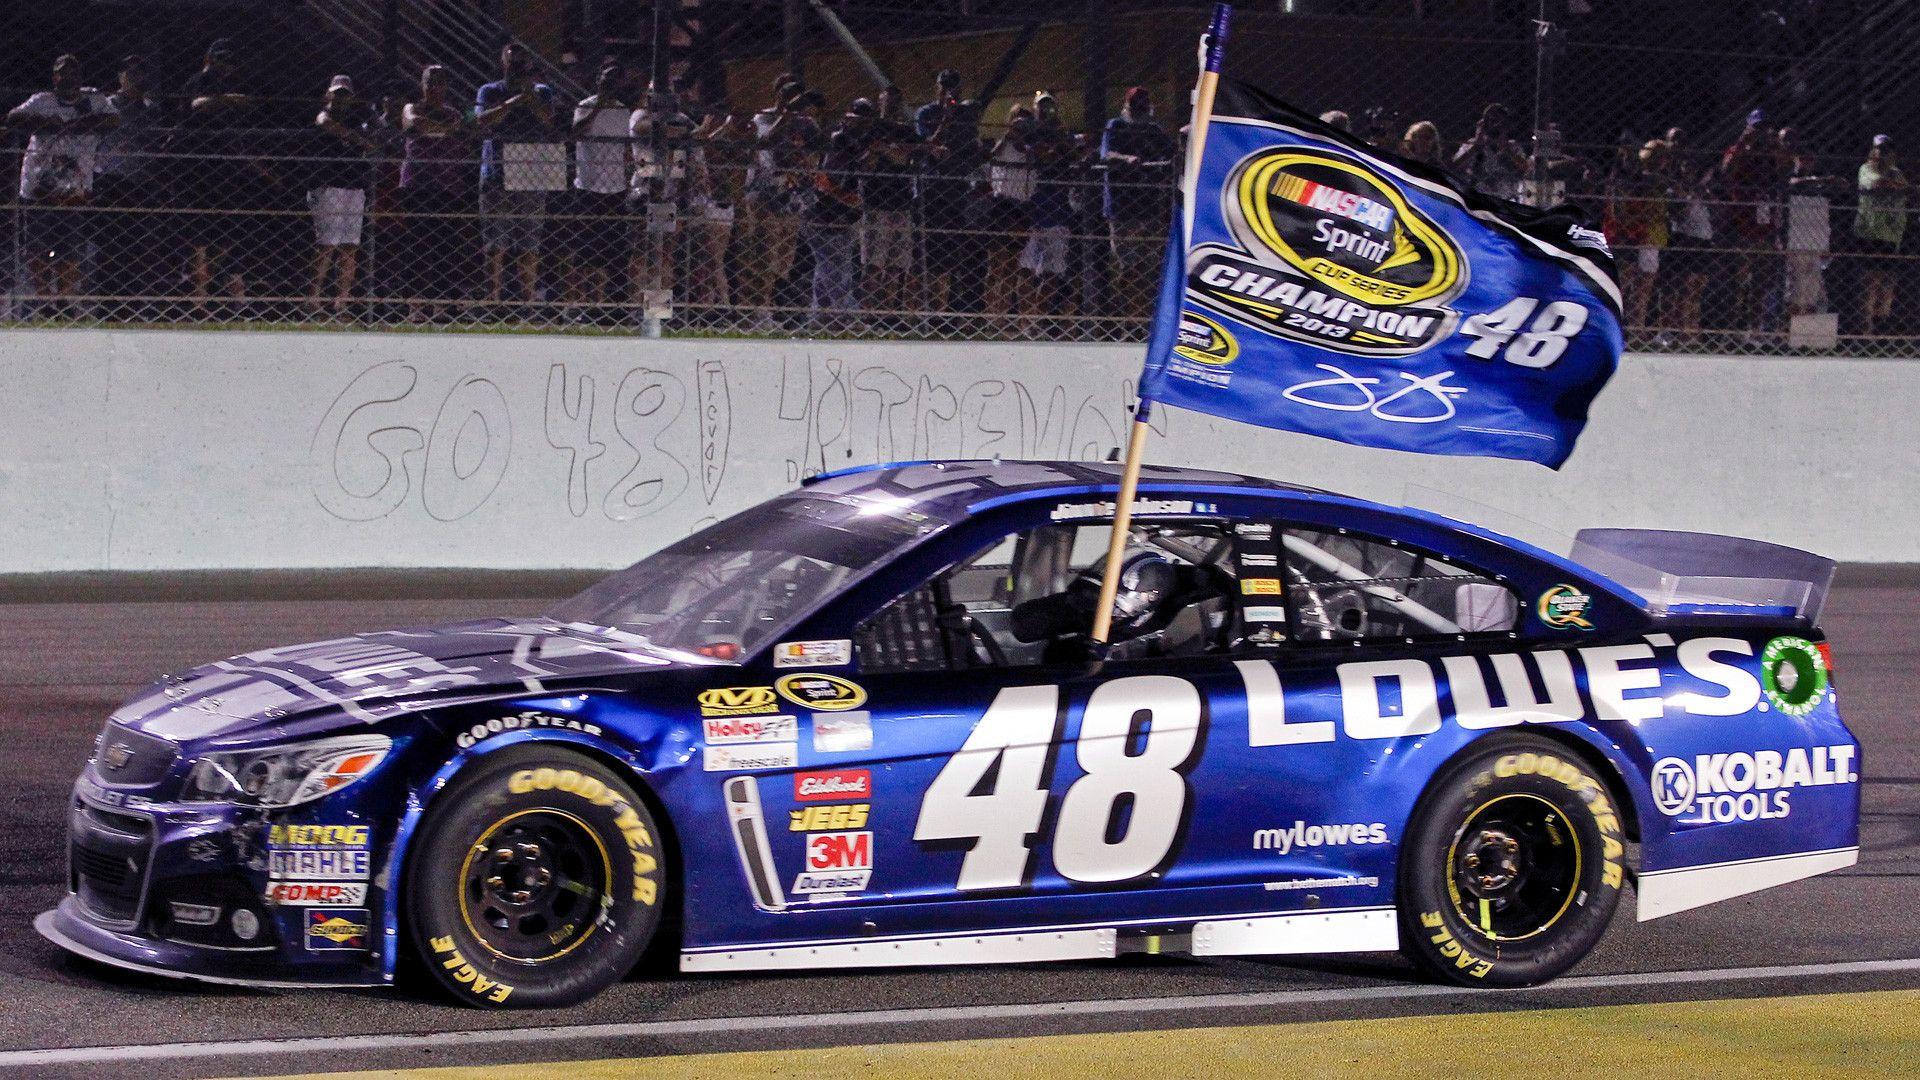 Jimmie Johnson 2018 Wallpaper (the best image in 2018)